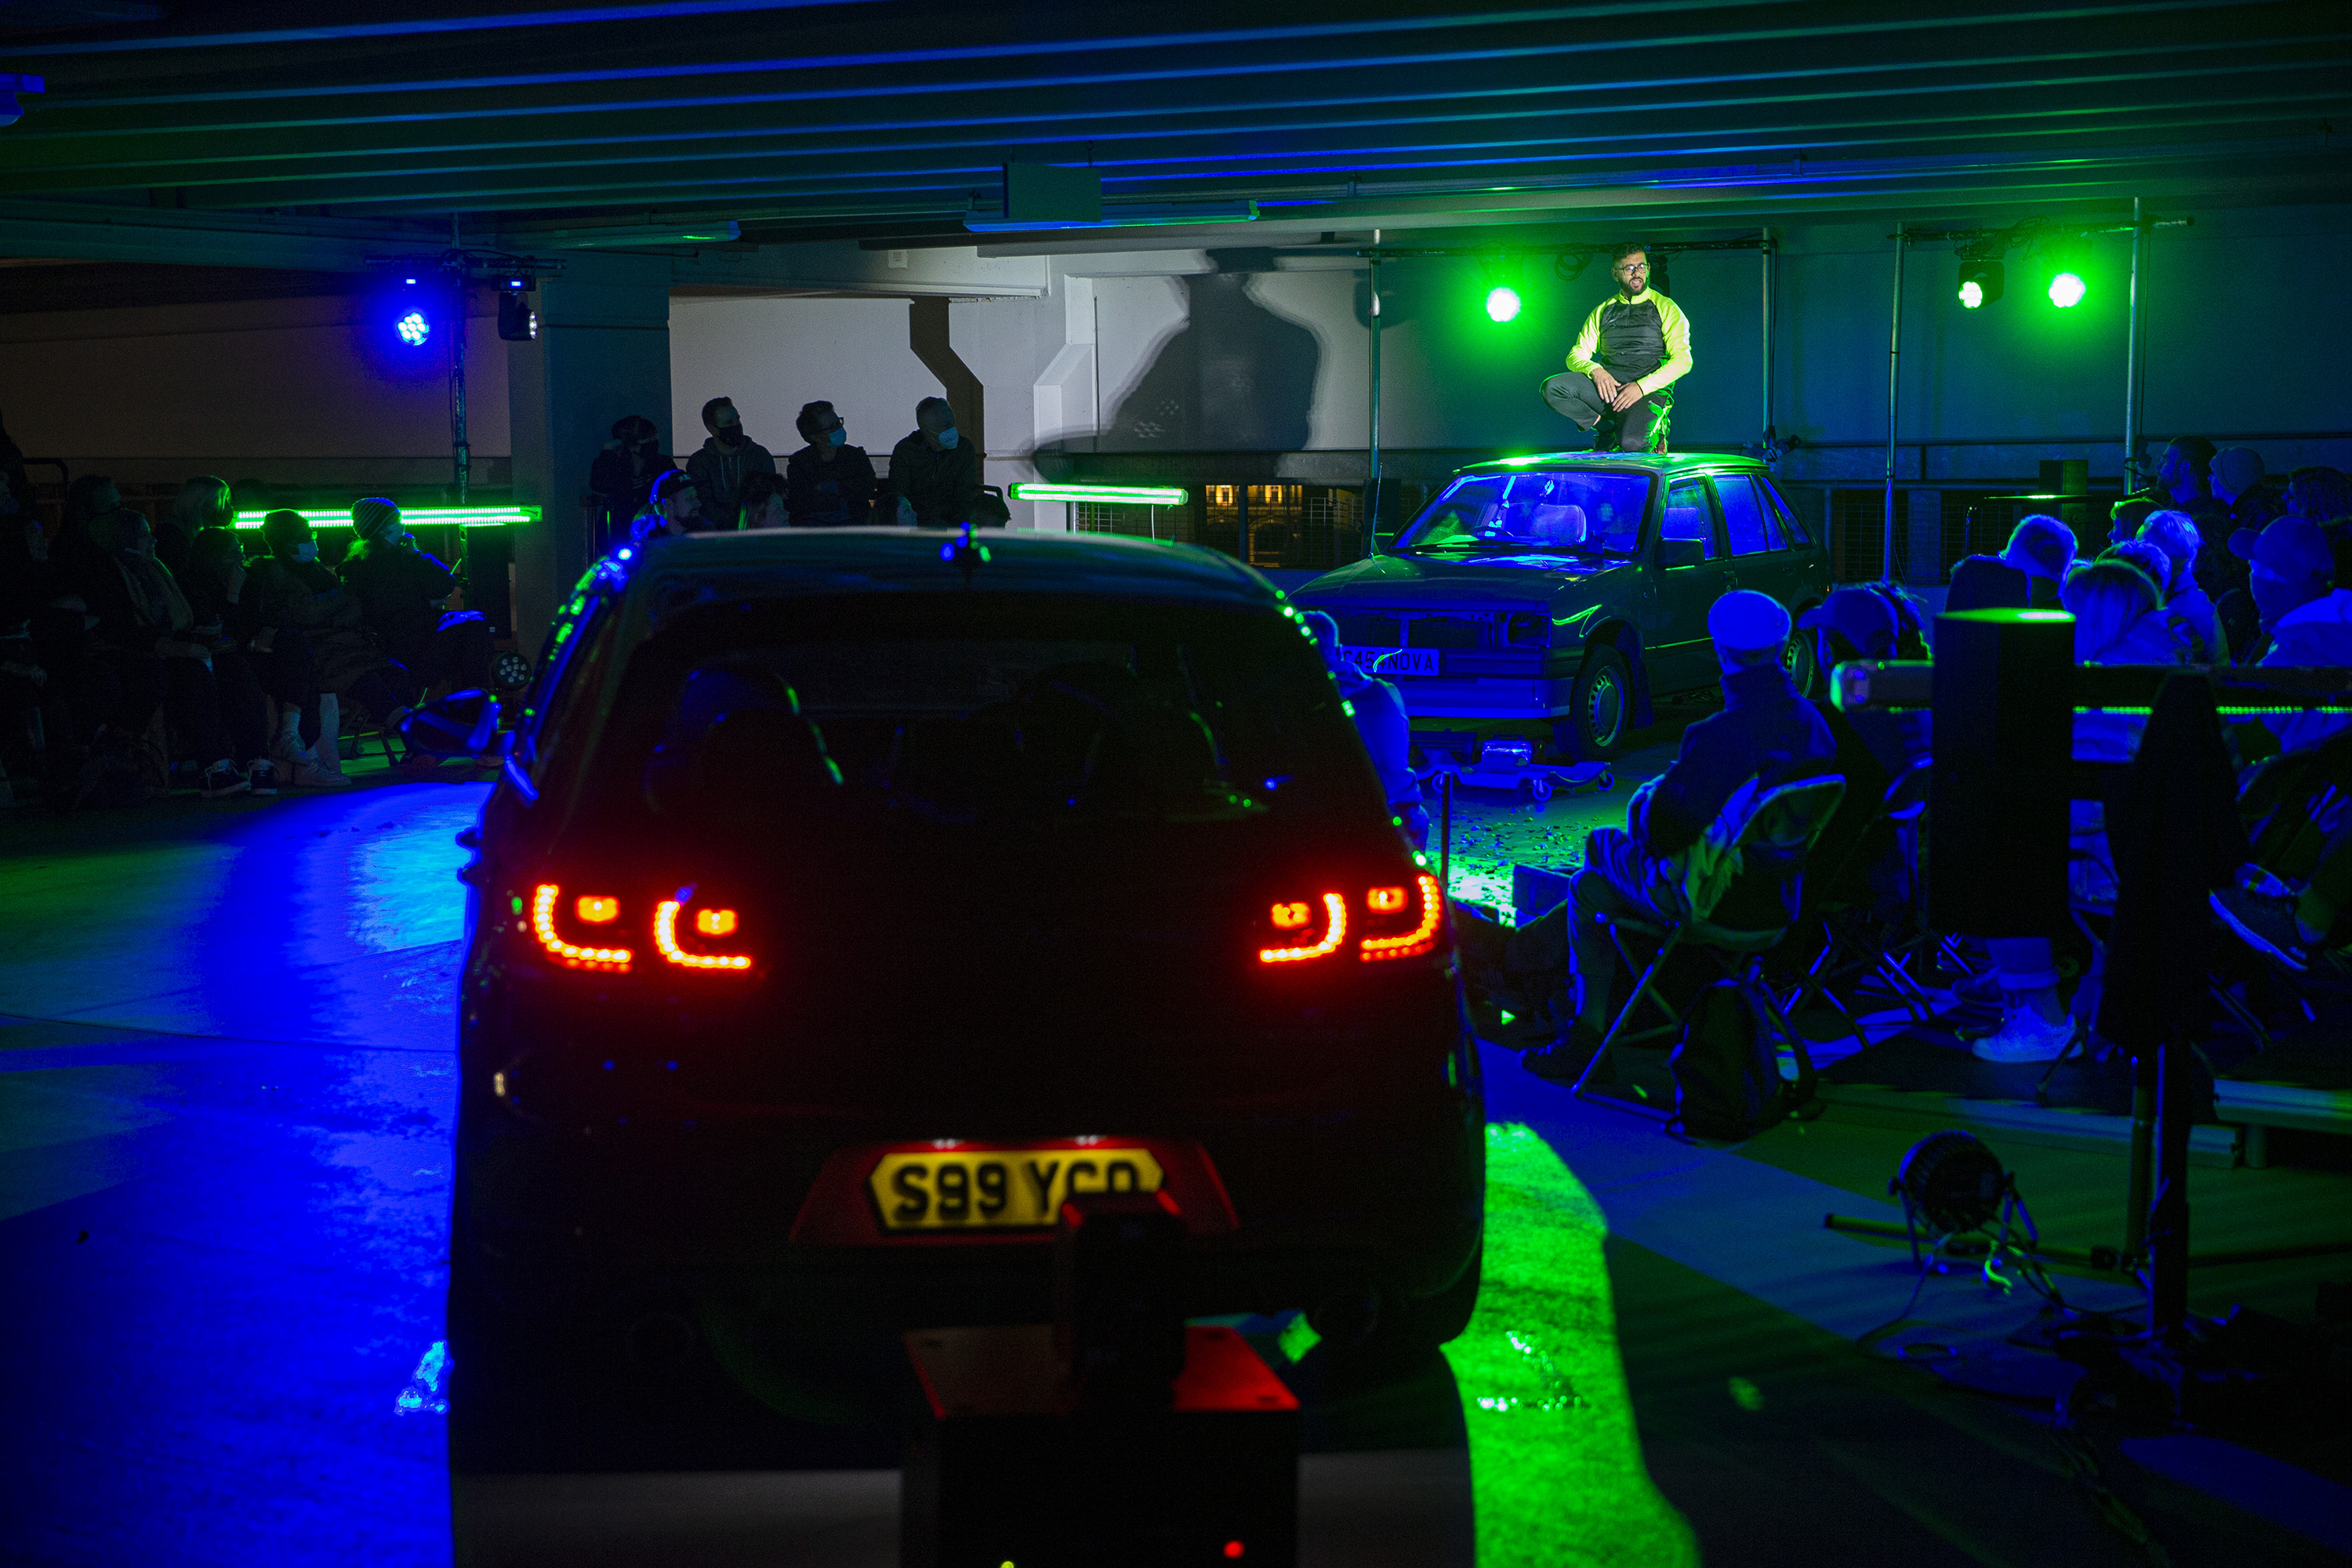 modified cars lit by dramatic lighting in a car park, with an audience watching